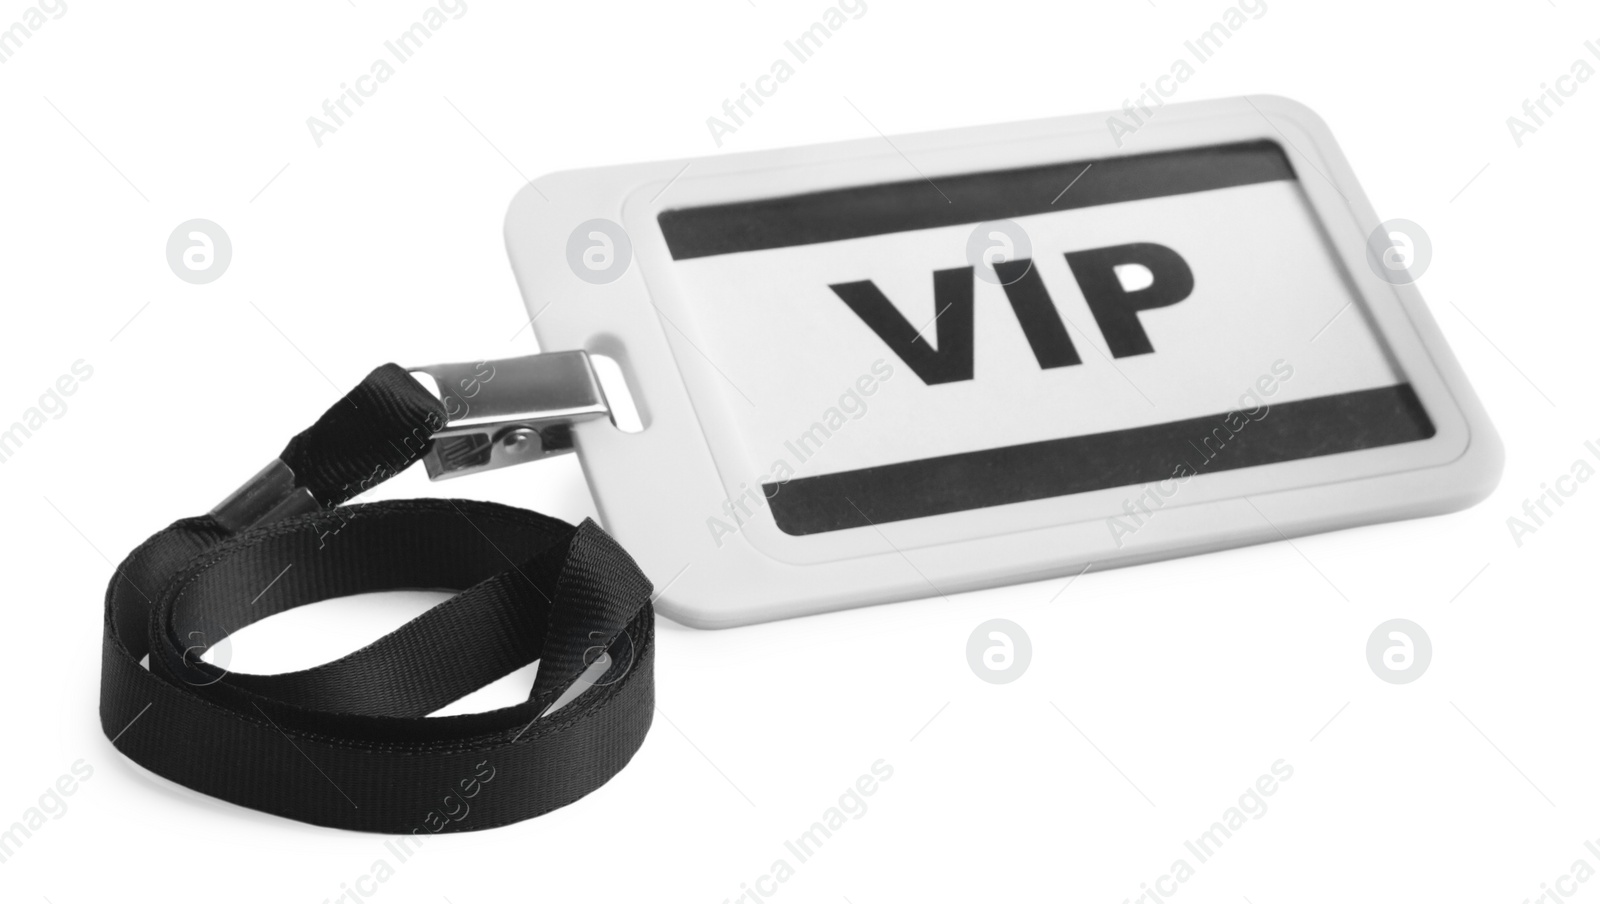 Photo of Plastic VIP badge with black ribbon isolated on white